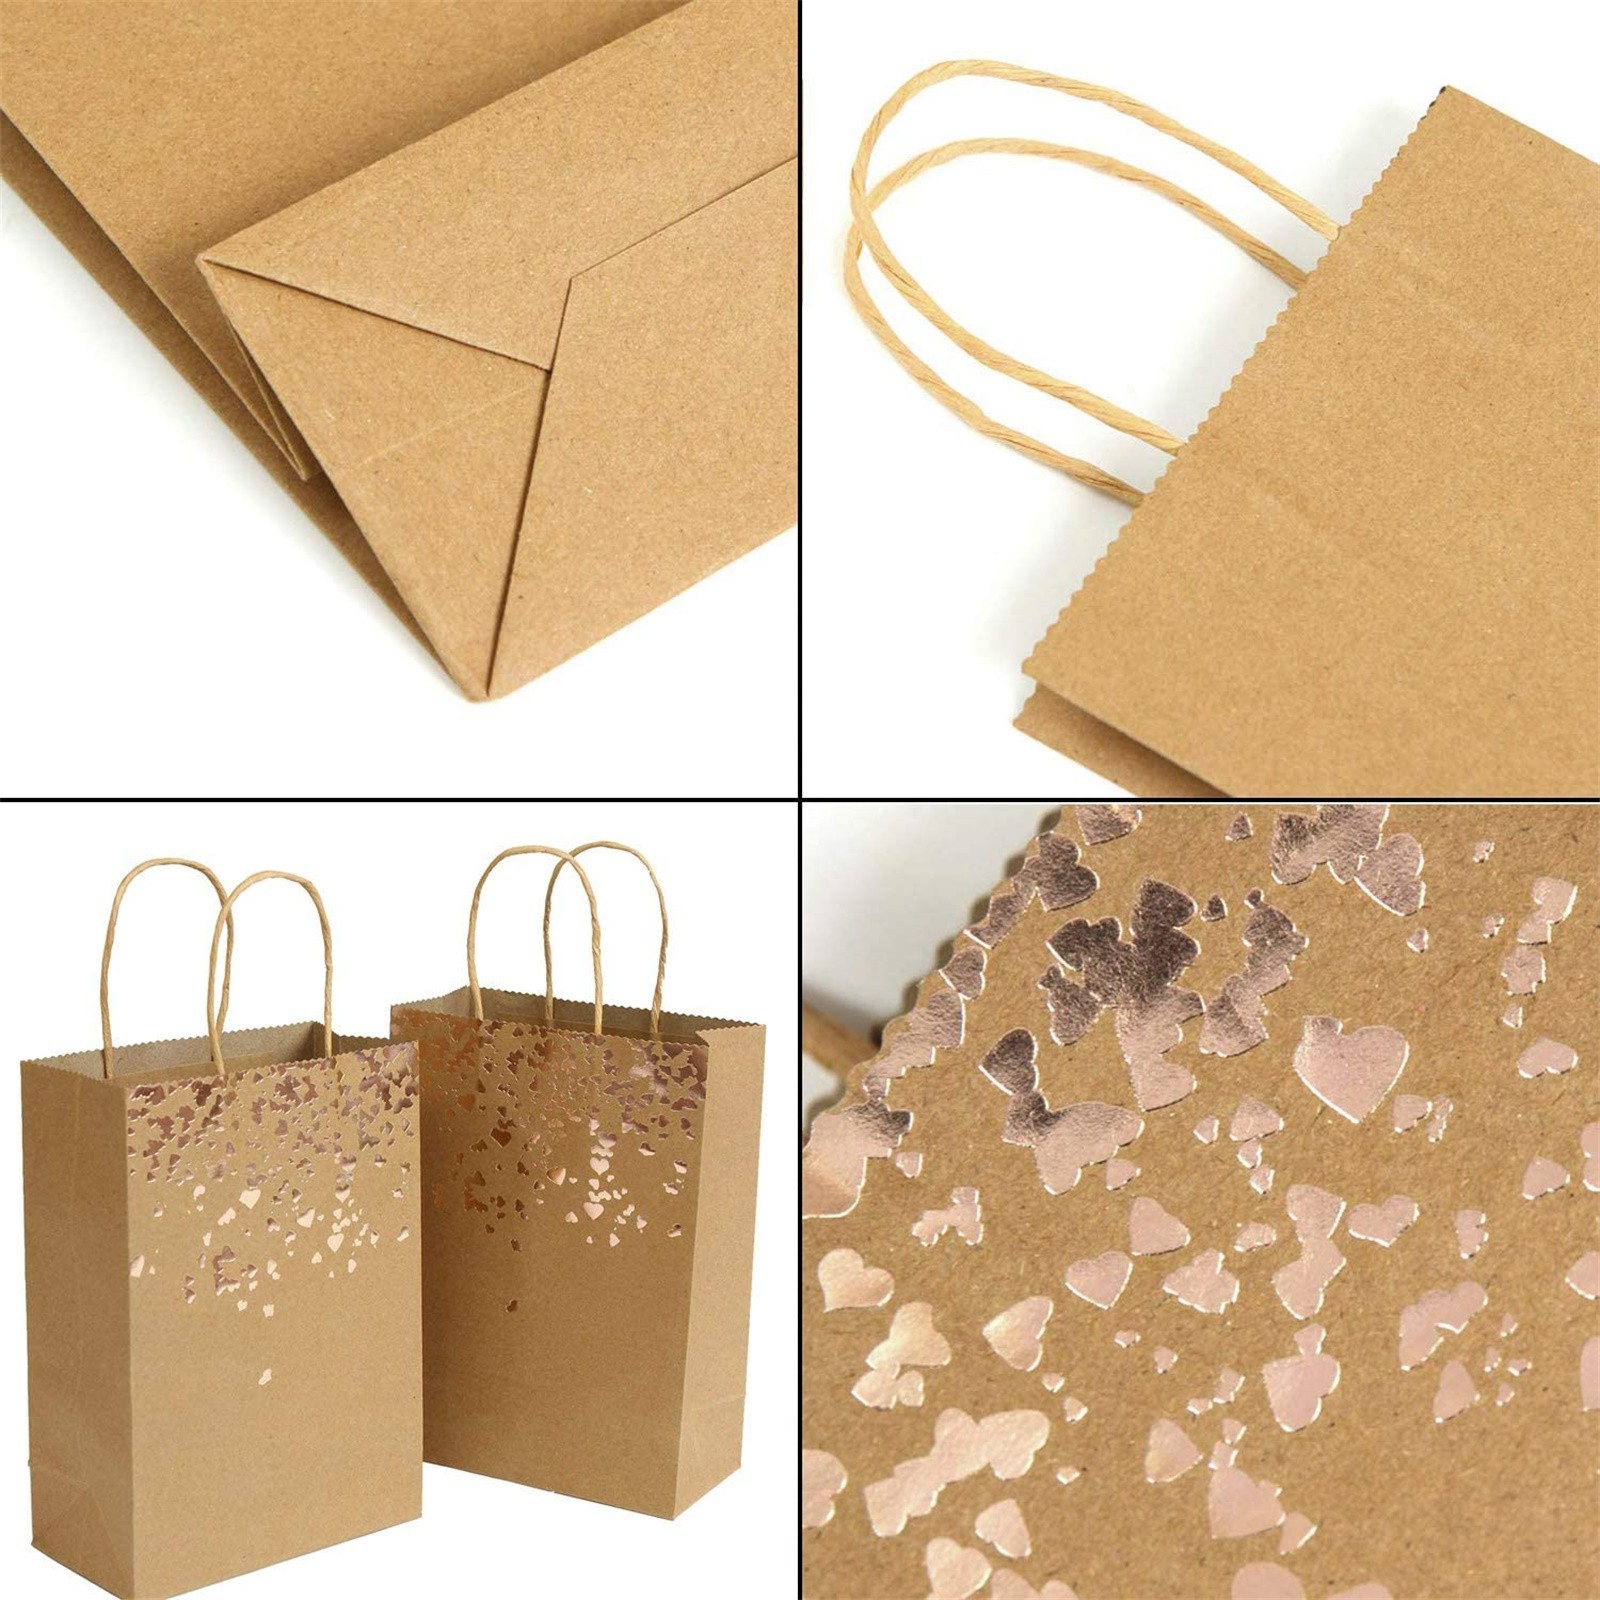 20pcs Heart-shaped Kraft Paper Bag with Handles Solid Color Gift Packing Bags for Store Clothes Wedding Party Supplies Handbags